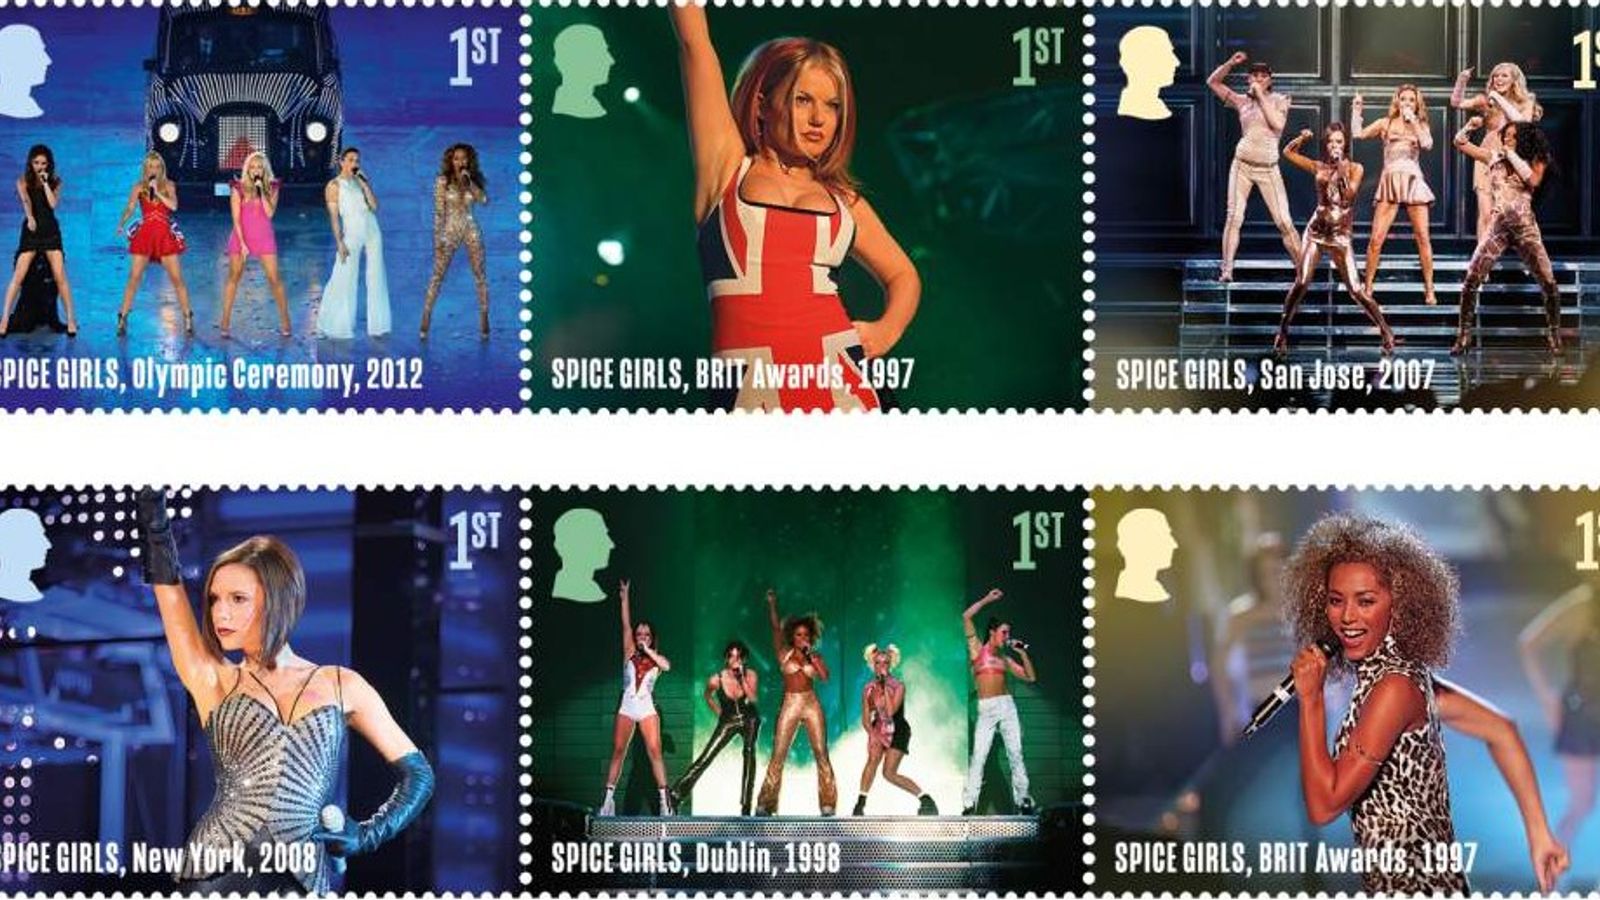 Spice Girls' 30th anniversary celebrated in Royal Mail stamp collection